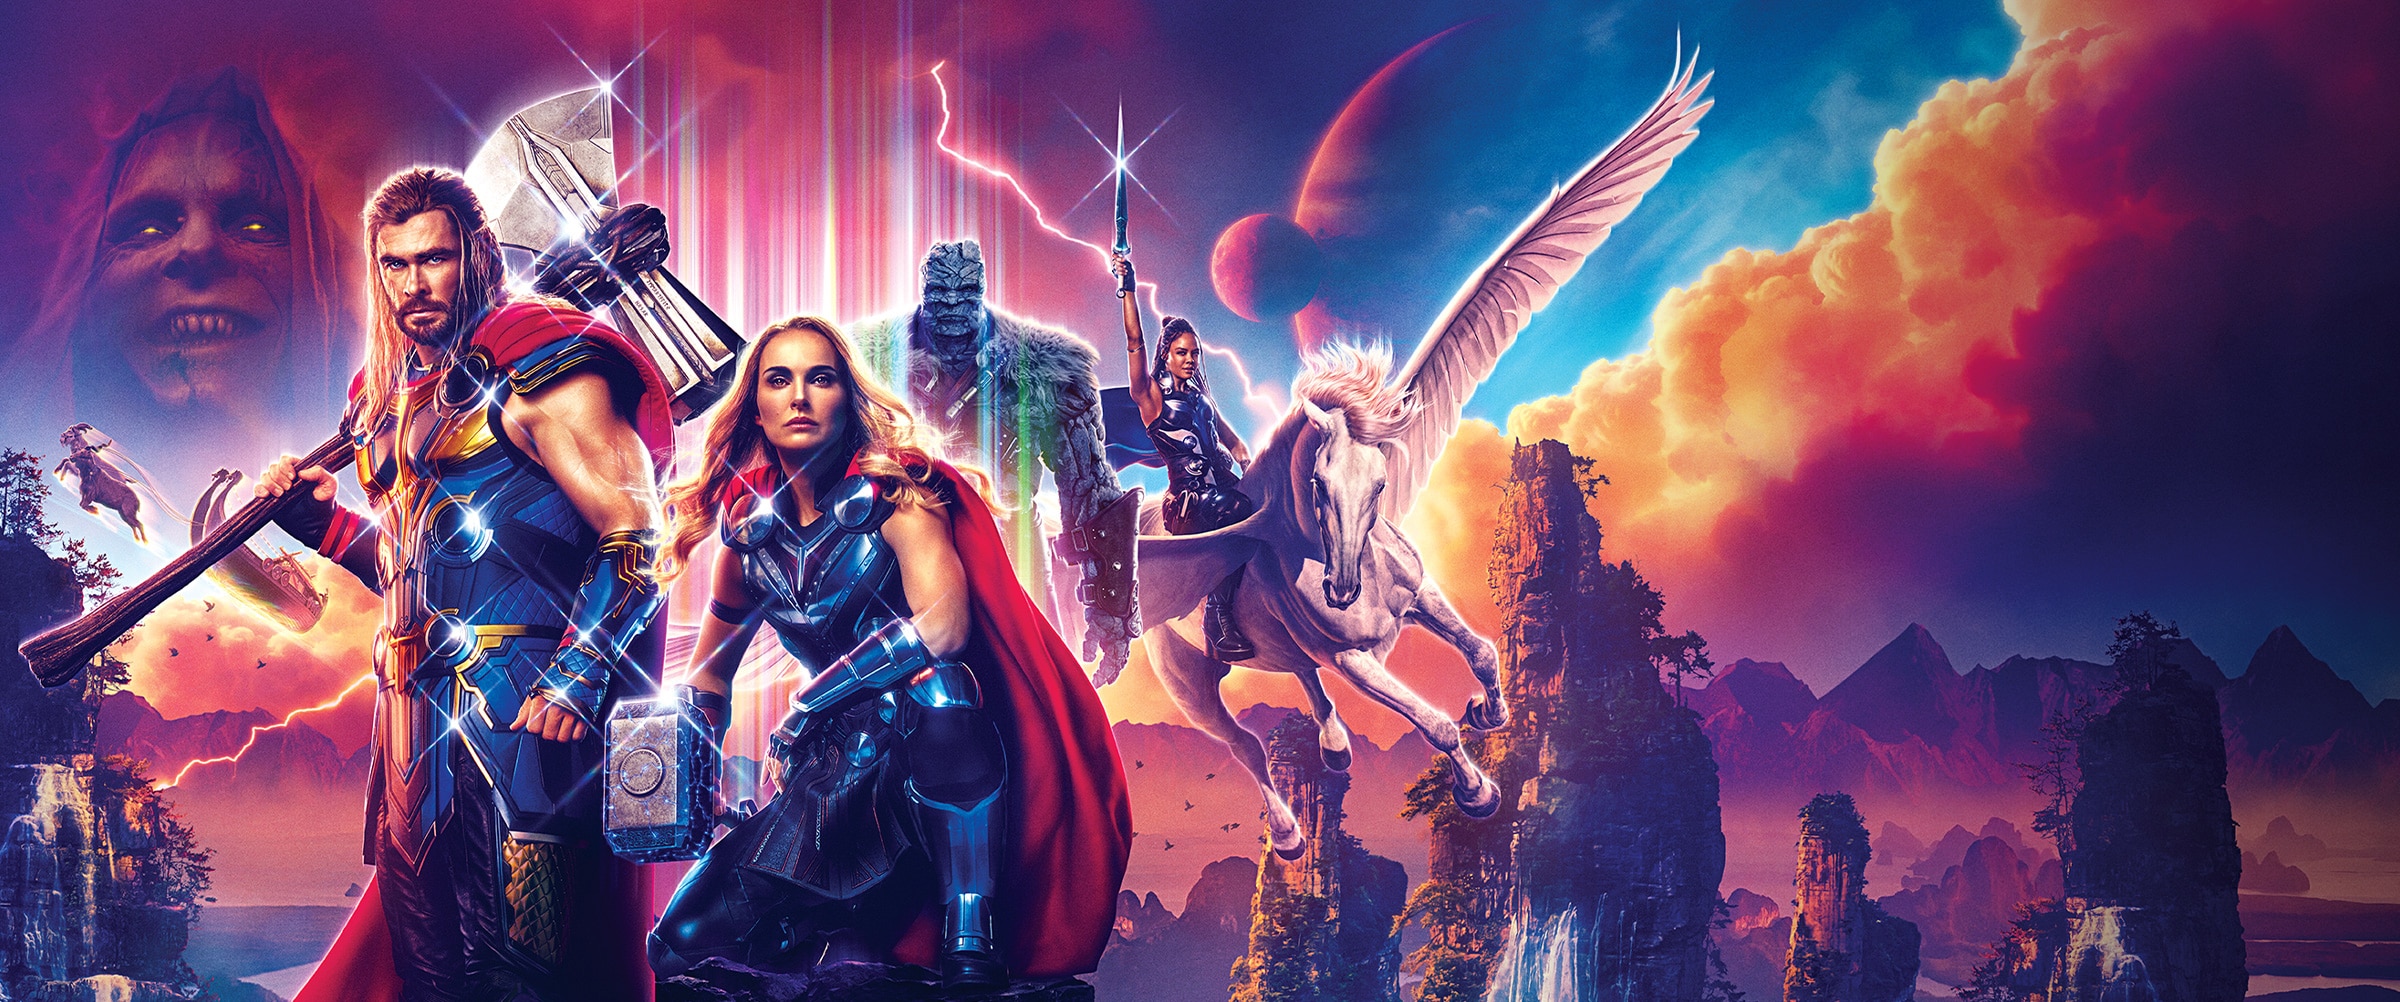 Why Didn't Gorr Wish for Jane to Live In 'Thor: Love and Thunder'?